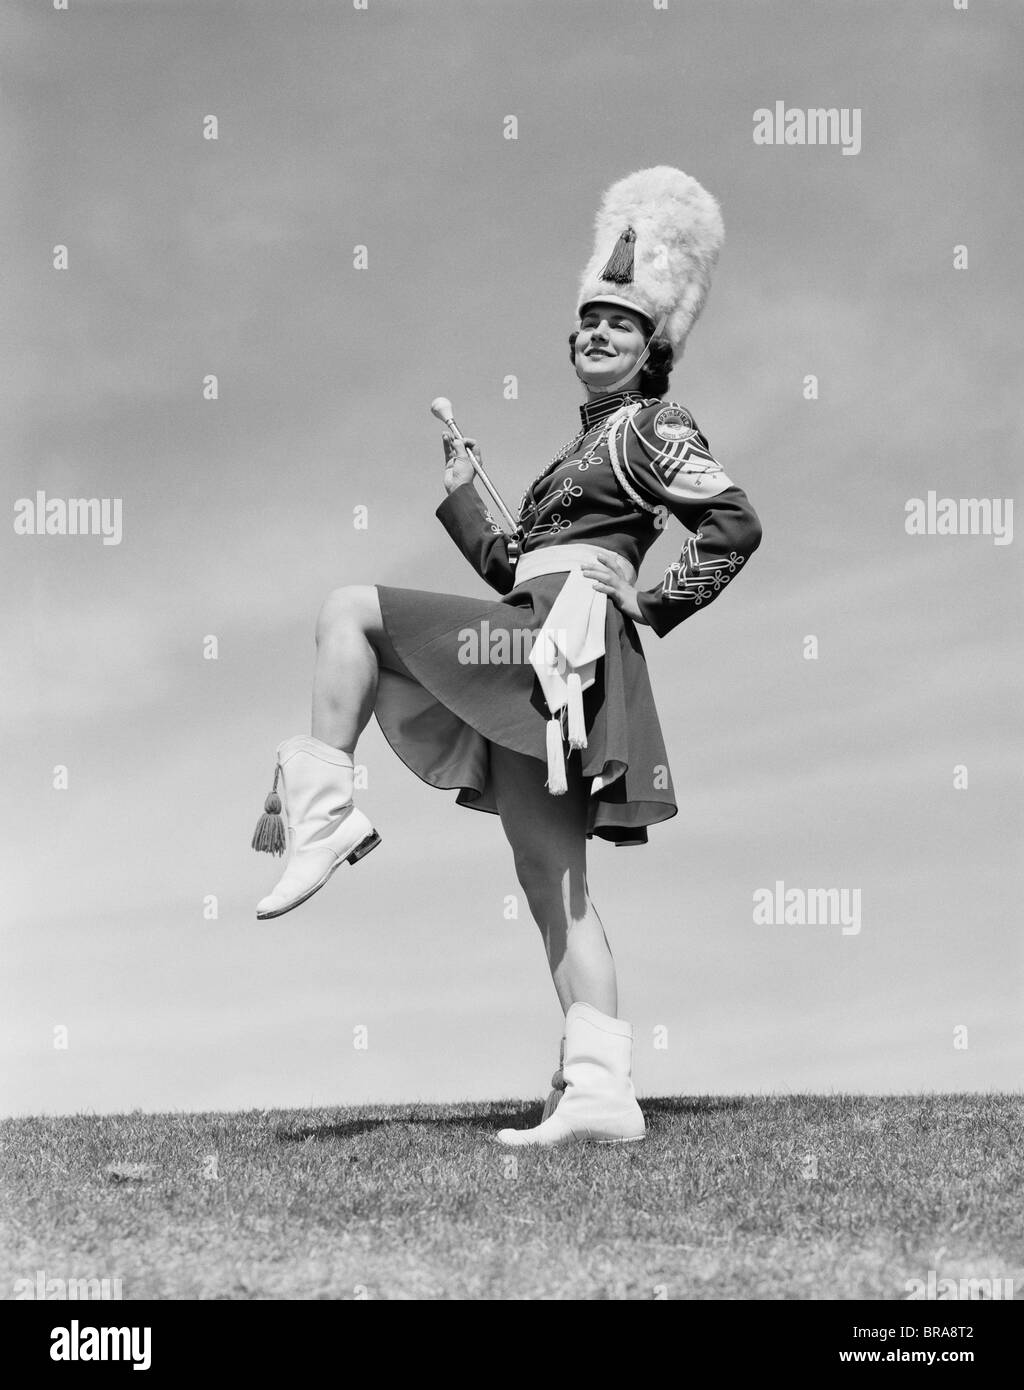 1950s SMILING MAJORETTE POSING OUTDOORS WEARING UNIFORM WITH SHORT SKIRT BOOTS TALL FURRY HAT HOLDING A BATON Stock Photo